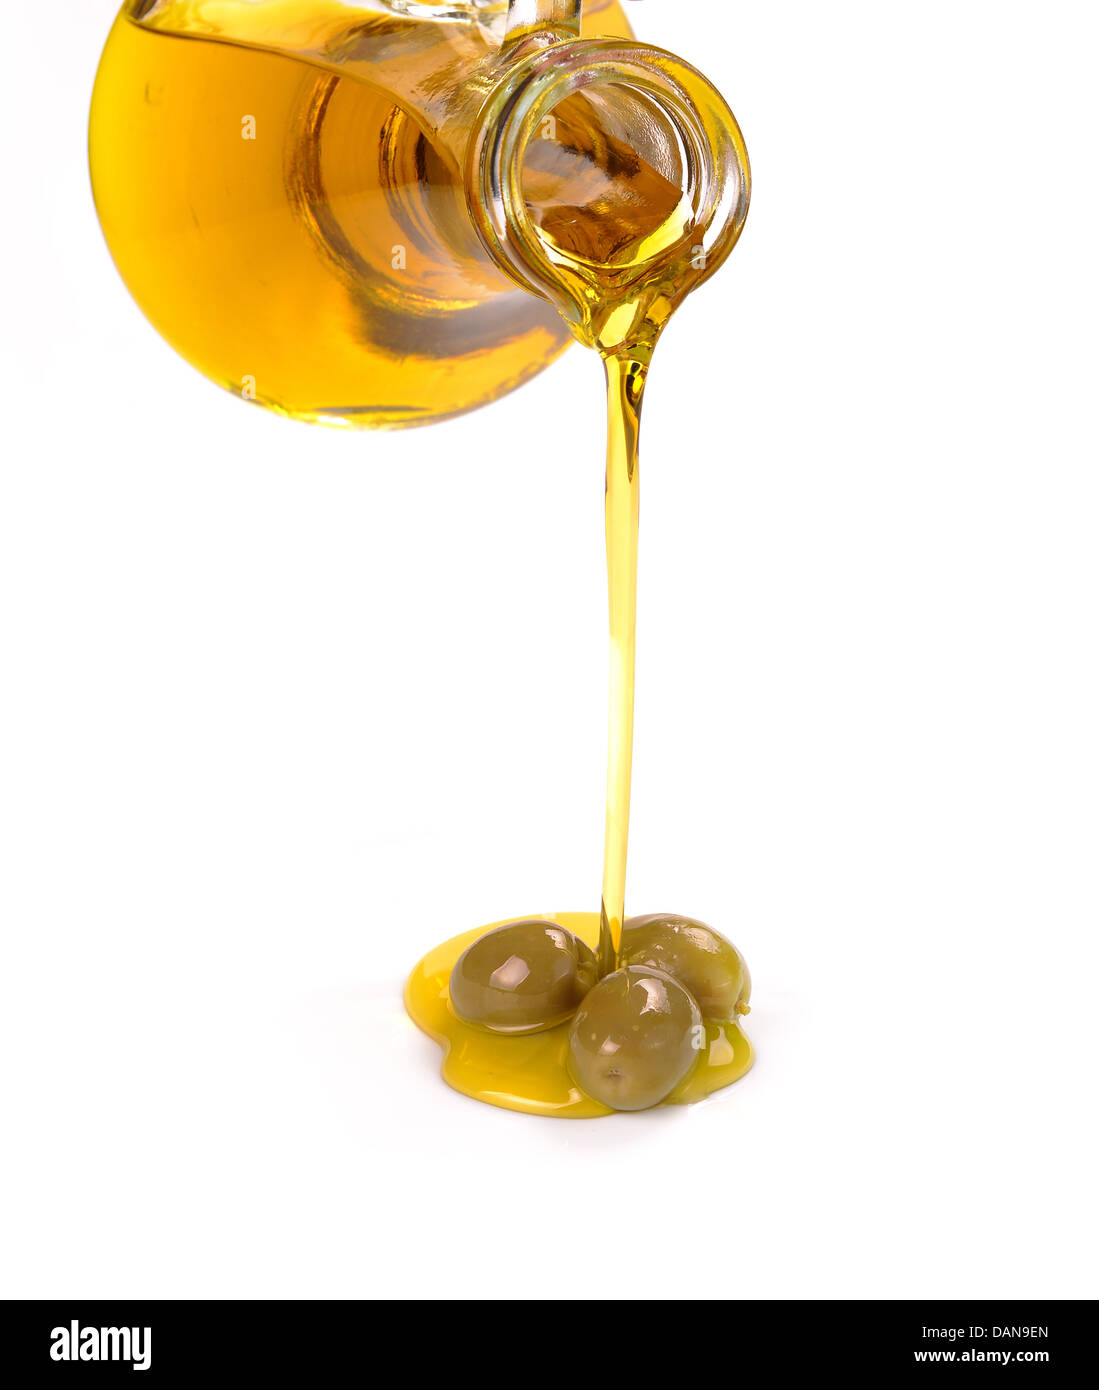 olive oil pouring from a bottle Stock Photo